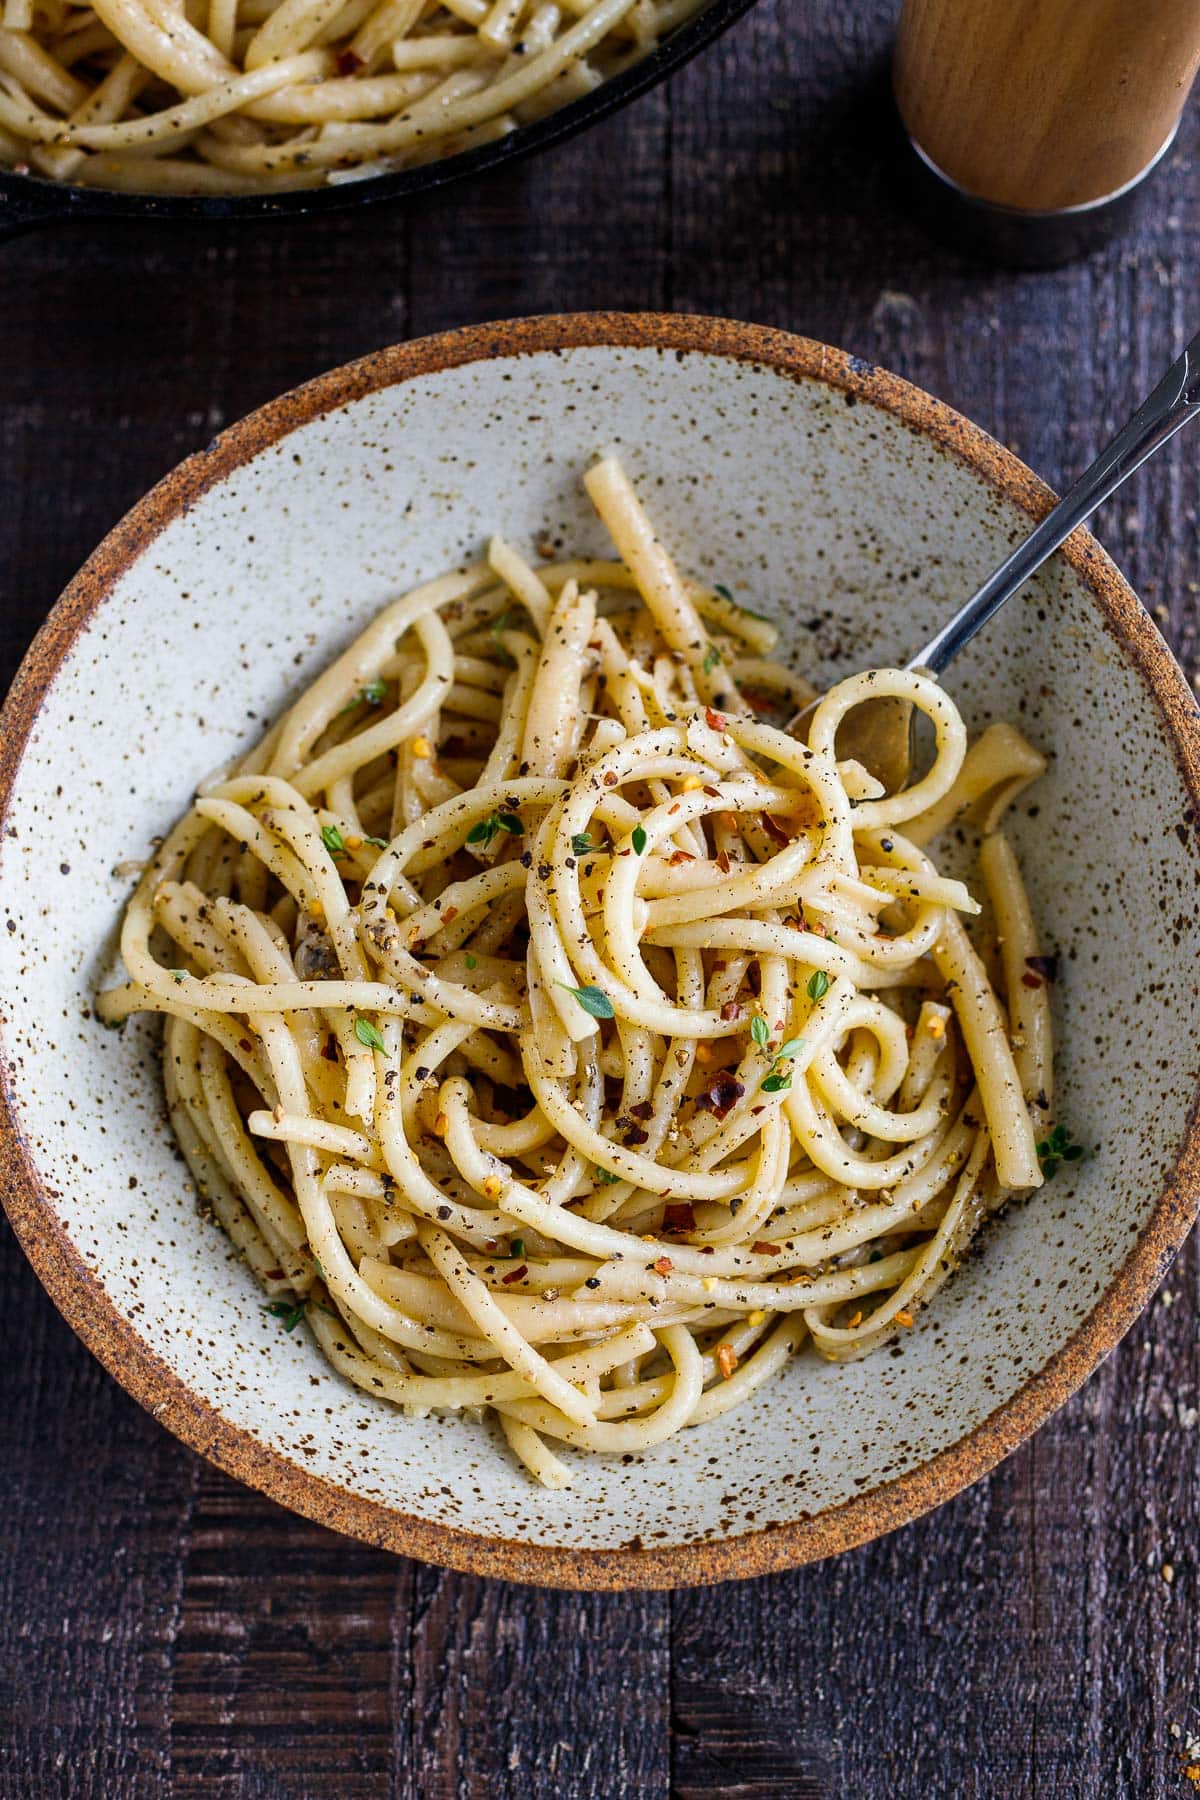 A simple, delicious recipe for Cacio e Pepe - a fast and flavorful- four-ingredient pasta recipe that can be topped with your favorite seasonal veggie (or protein!).